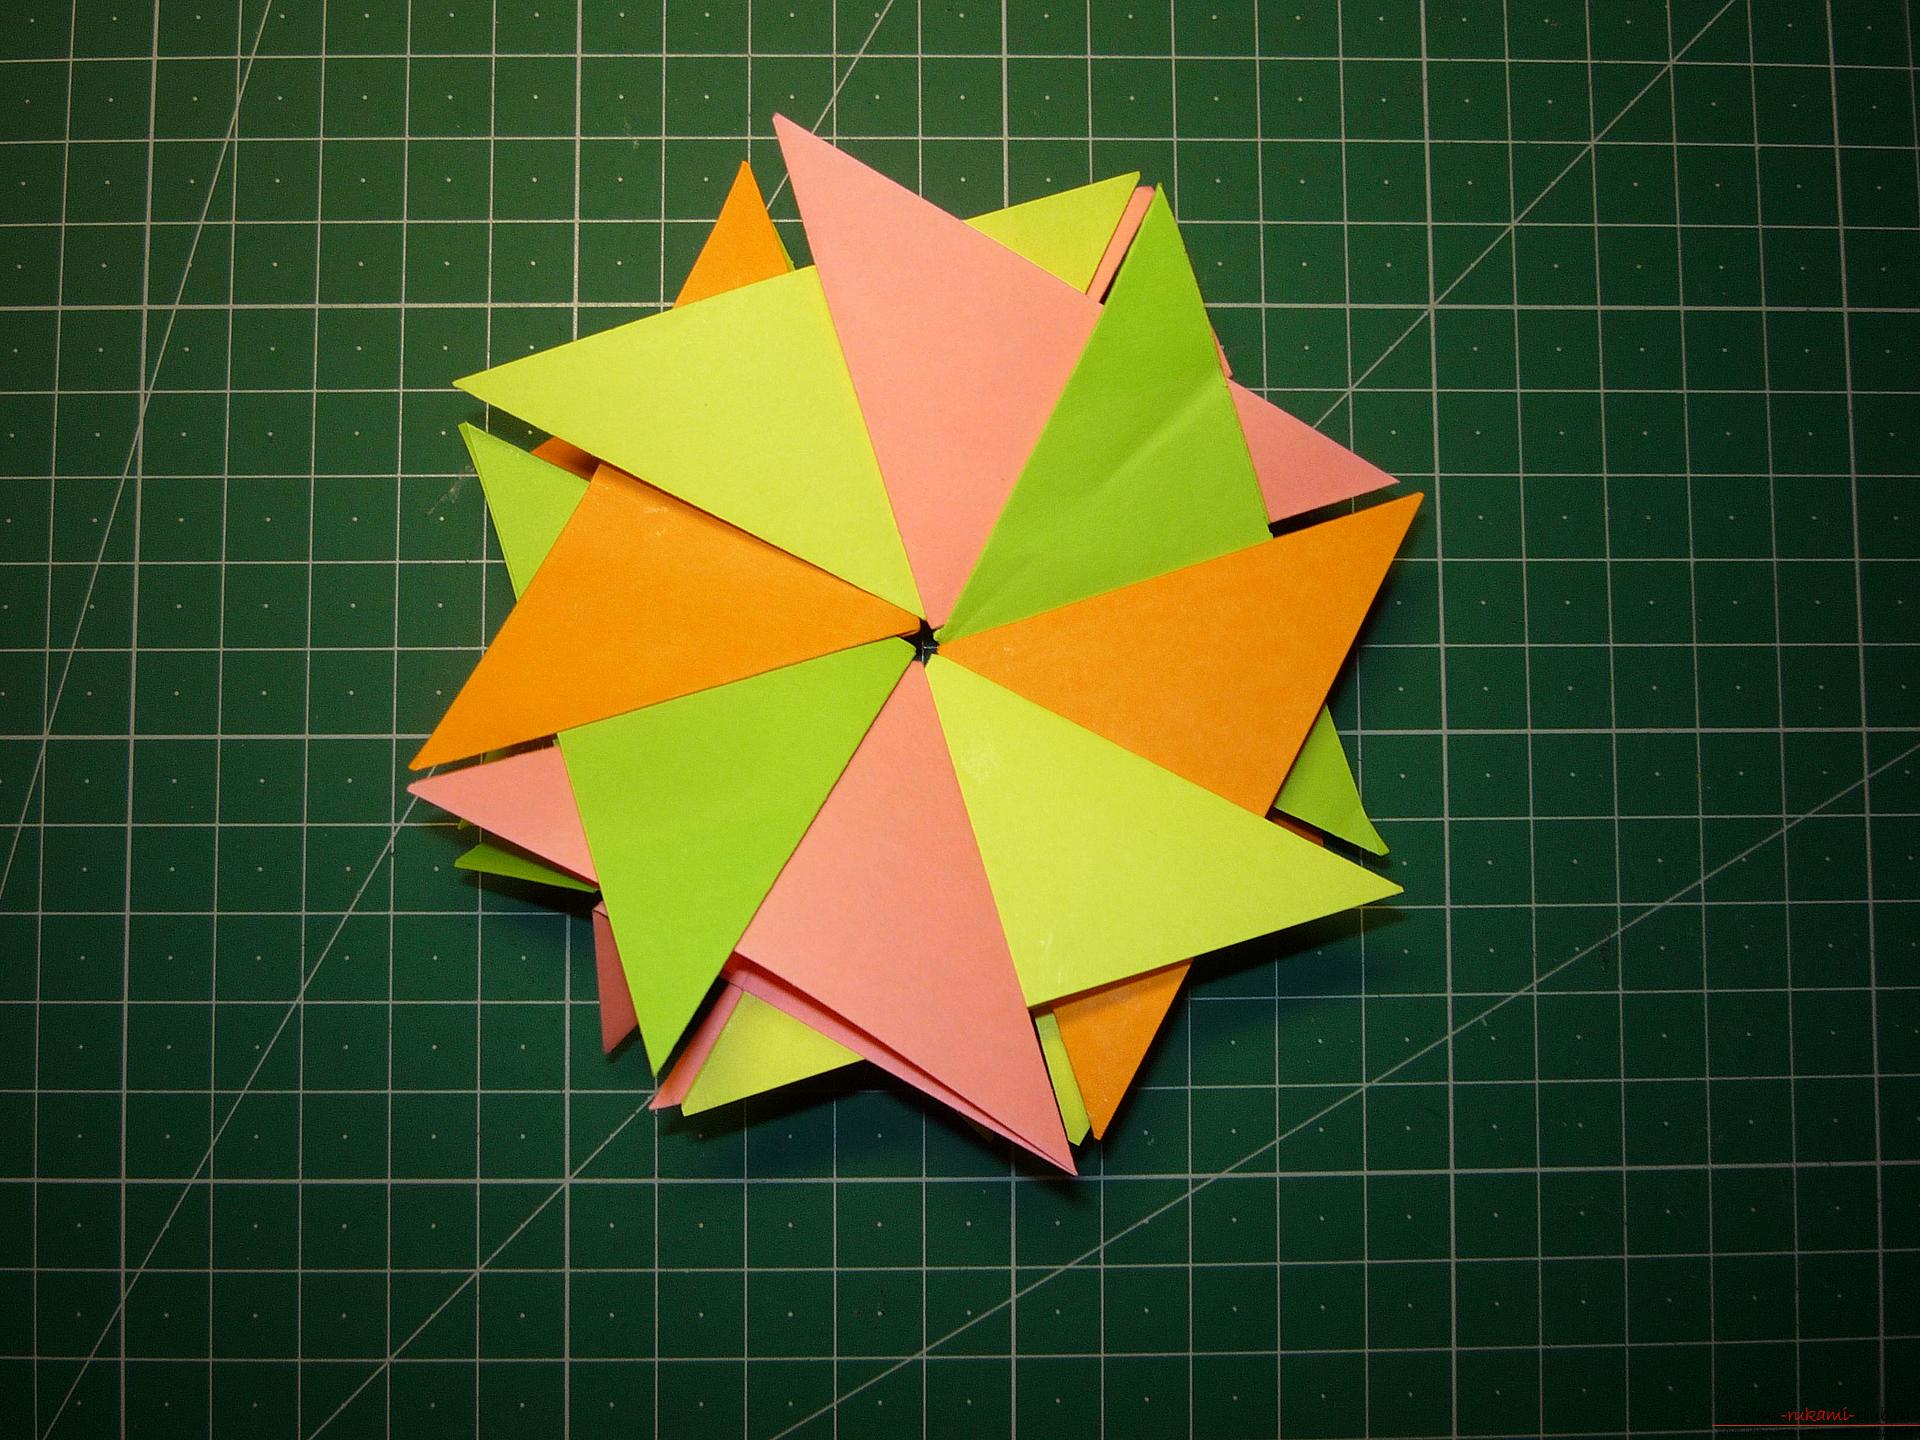 The master class will tell you how to make a modular origami star out of paper with your own hands. Picture №10